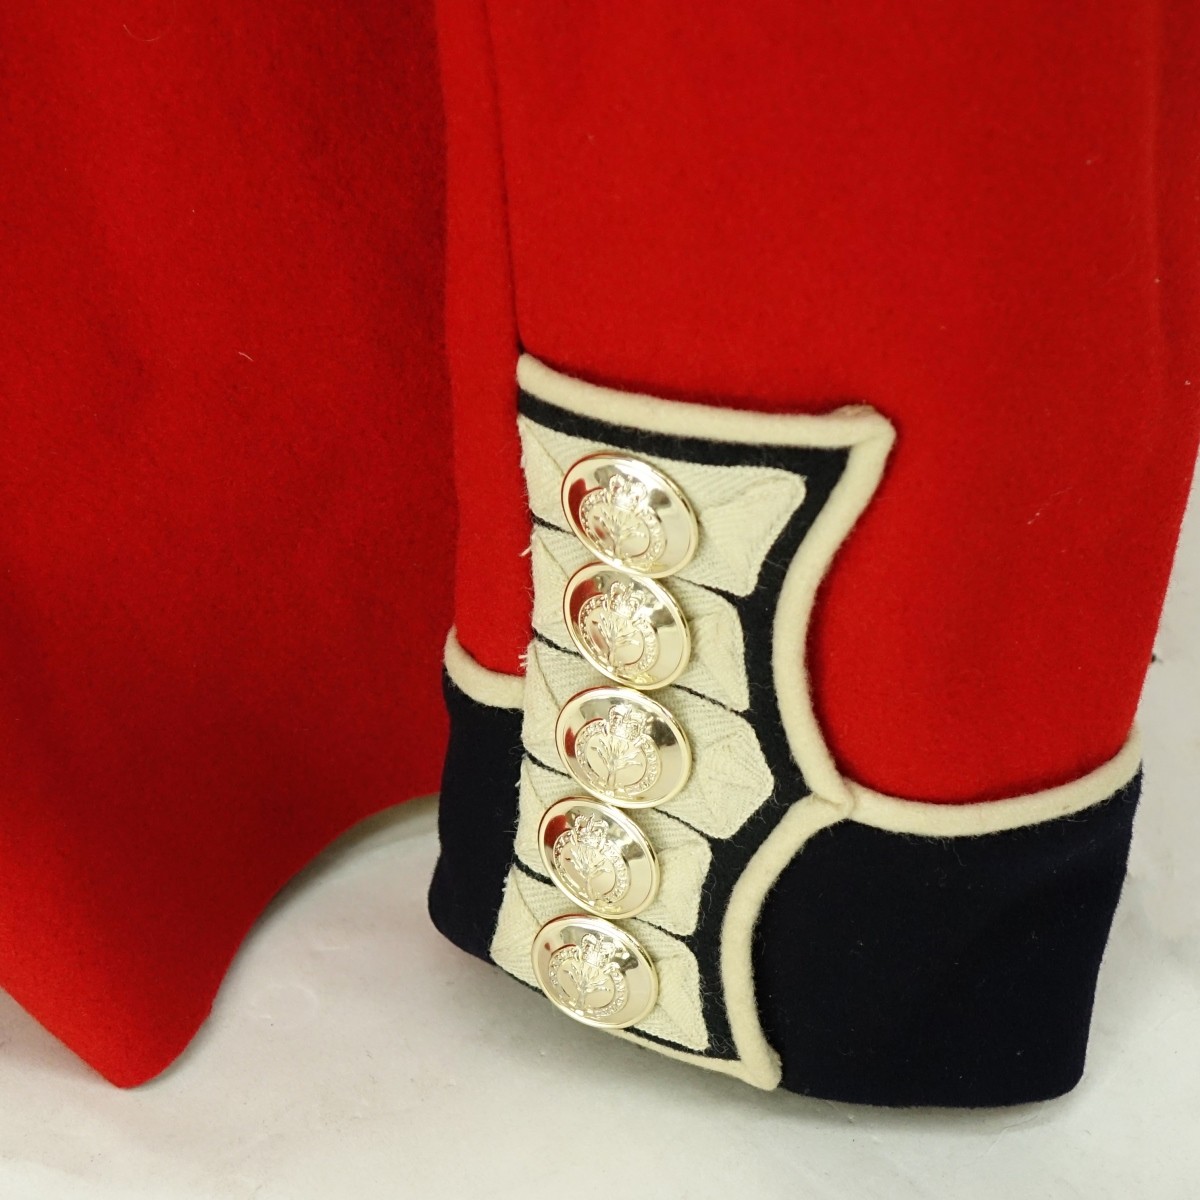 British Army Welsh Guards Red Wool Tunic Coat.